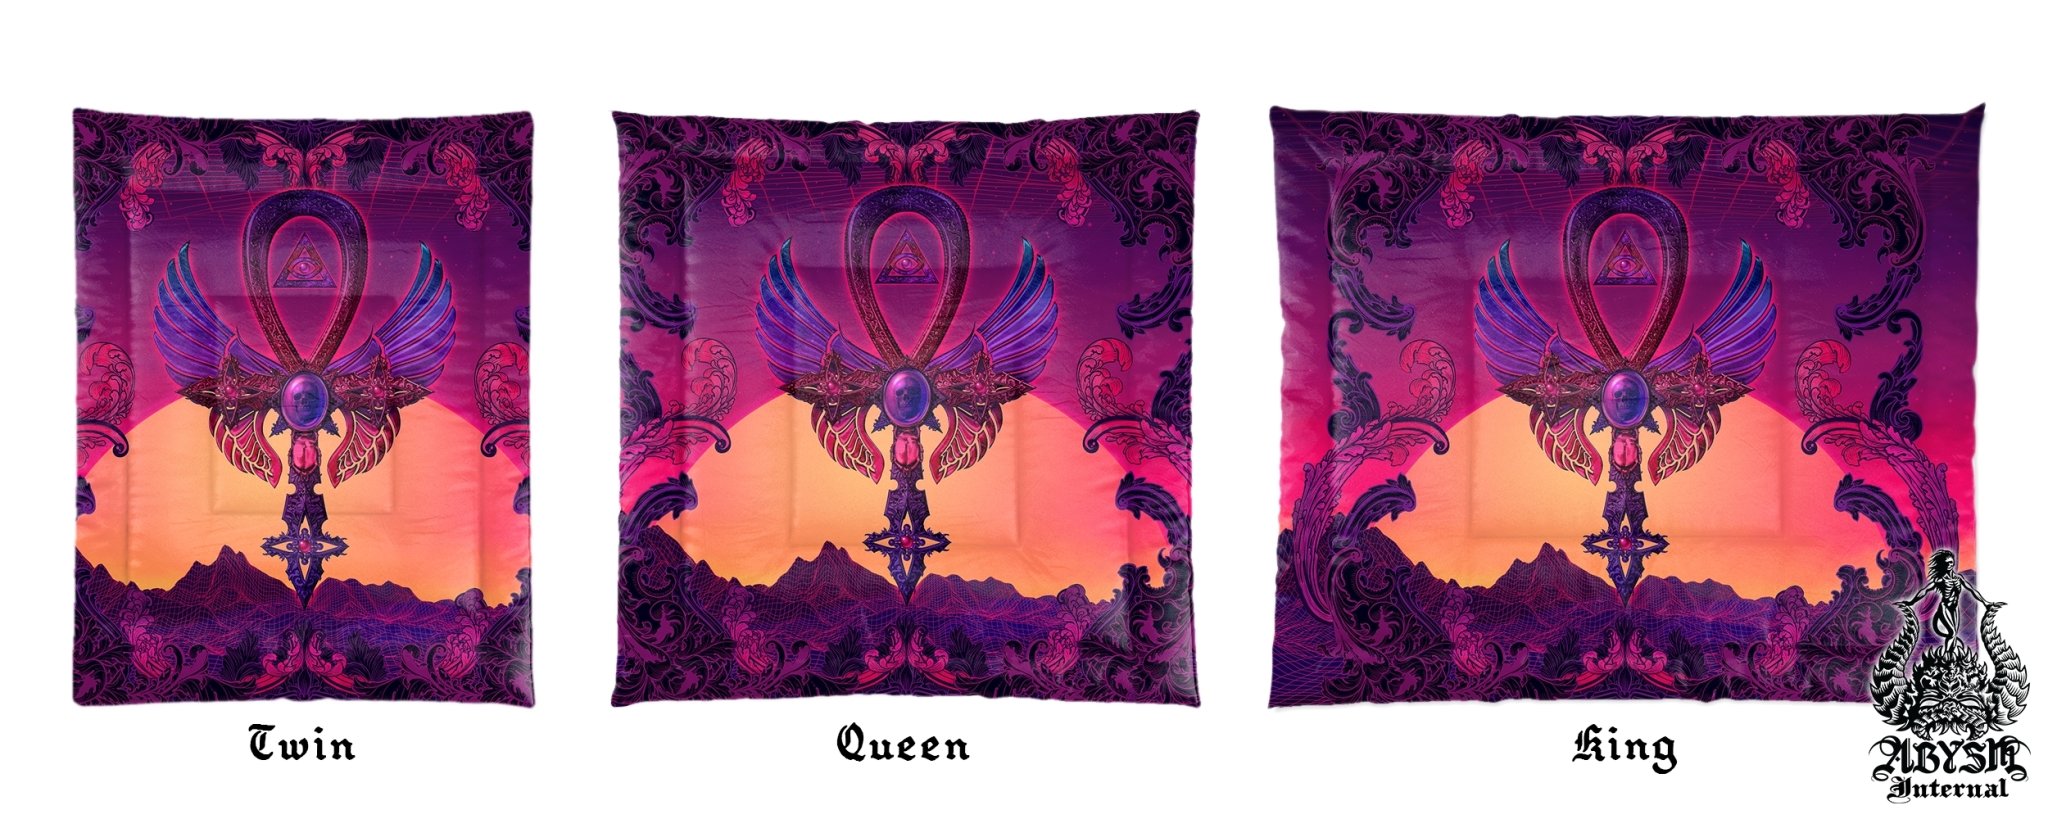 Vaporwave Bedding Set, Comforter and Duvet, Synthwave Bed Cover and Retrowave Bedroom Decor, King, Queen and Twin Size, Psychedelic 80s Gamer Room Art - Ankh, Goth Cross - Abysm Internal